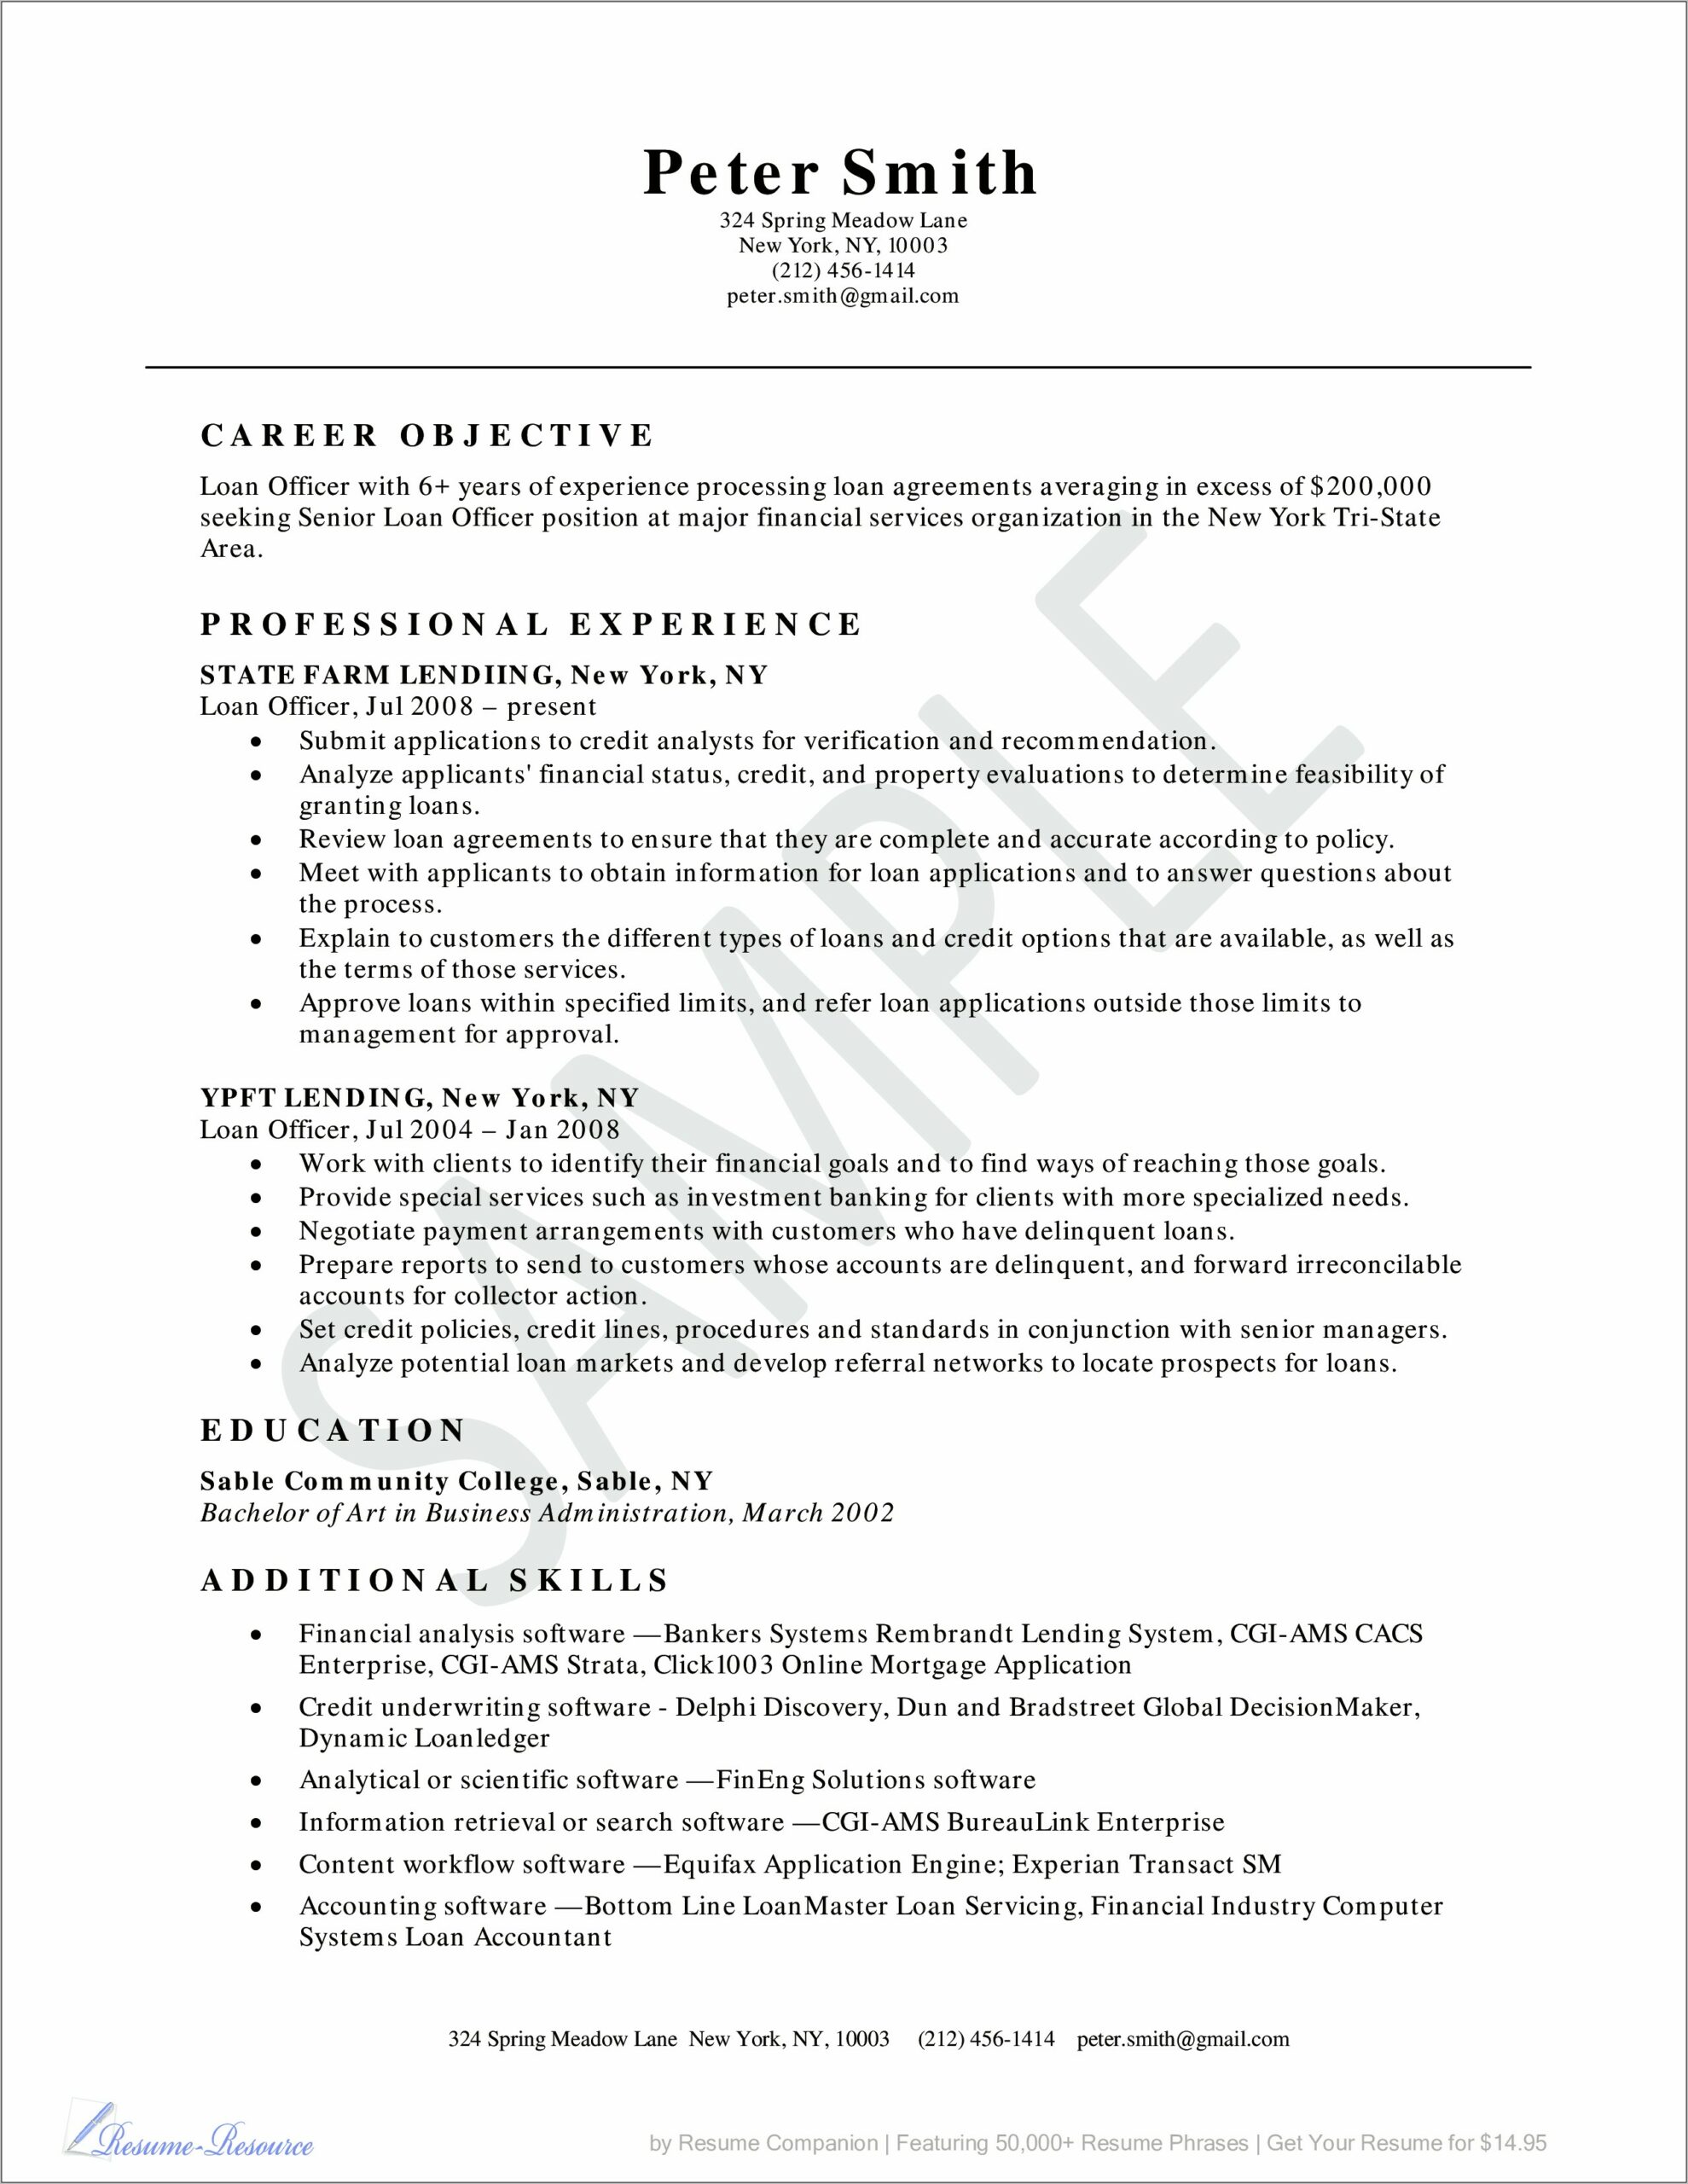 Example Resume For Mortgage Loan Officer